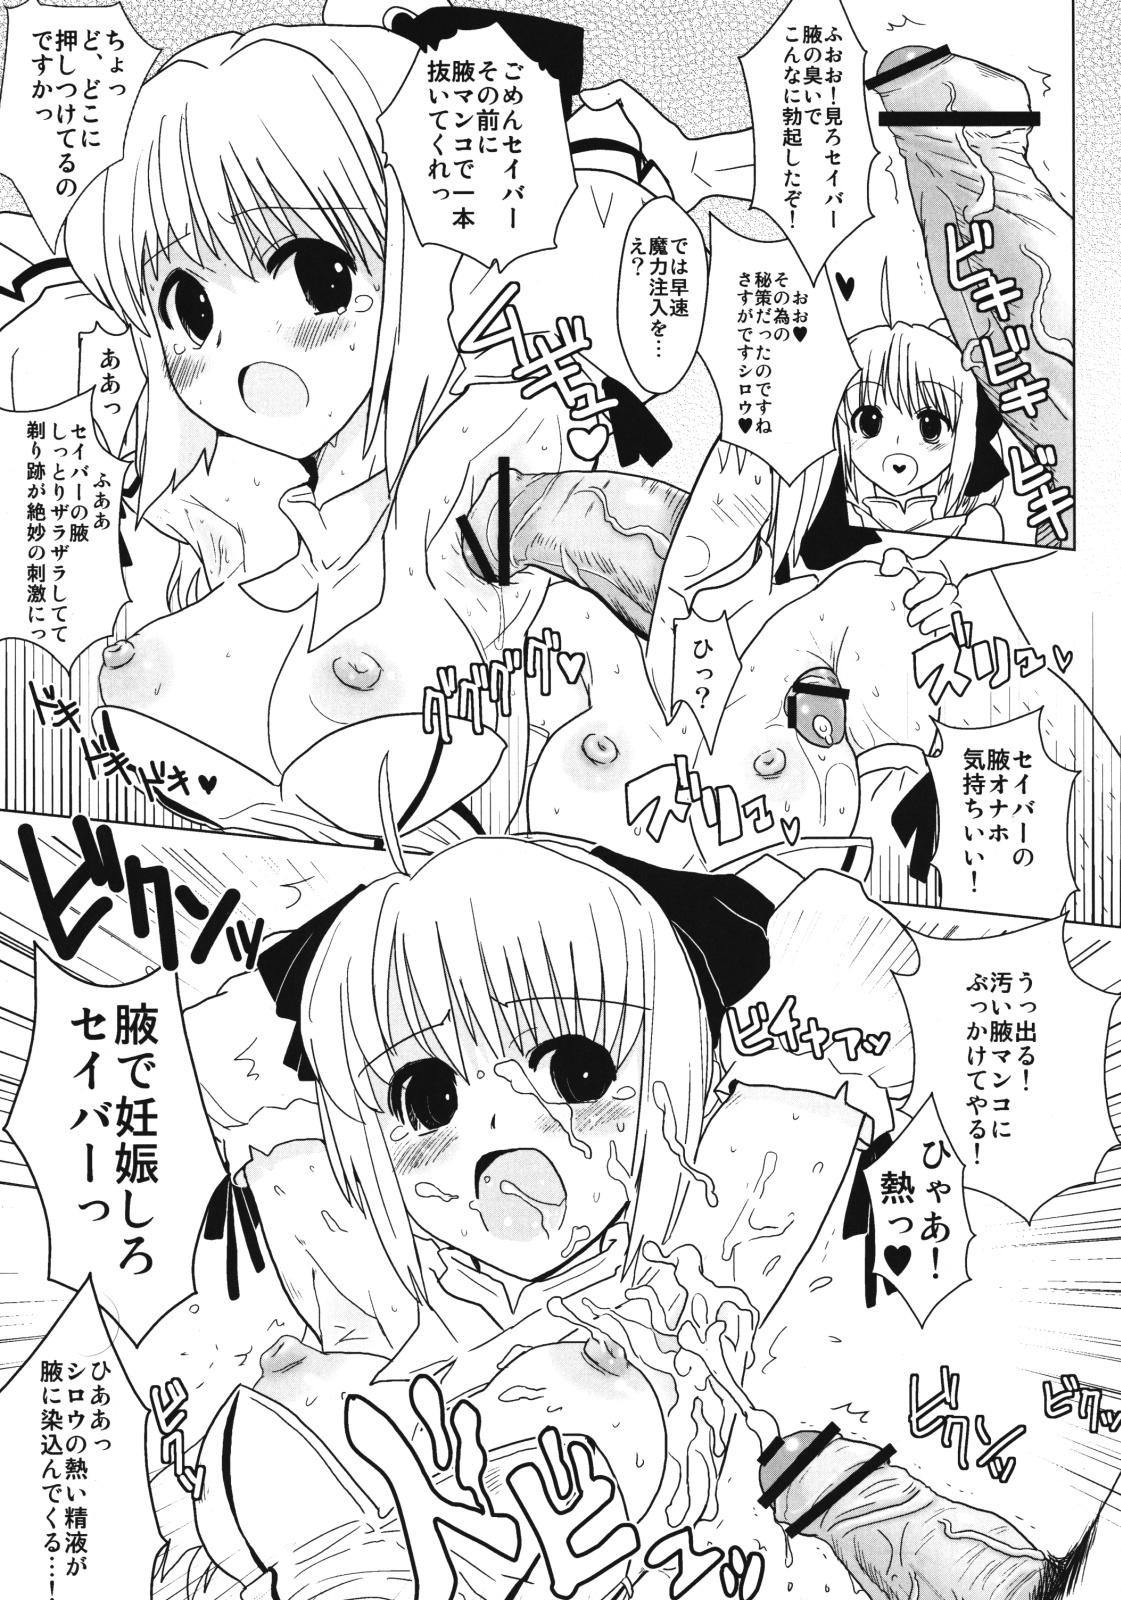 Cumswallow Lily Holic no Subete - Fate stay night Vergon - Page 8